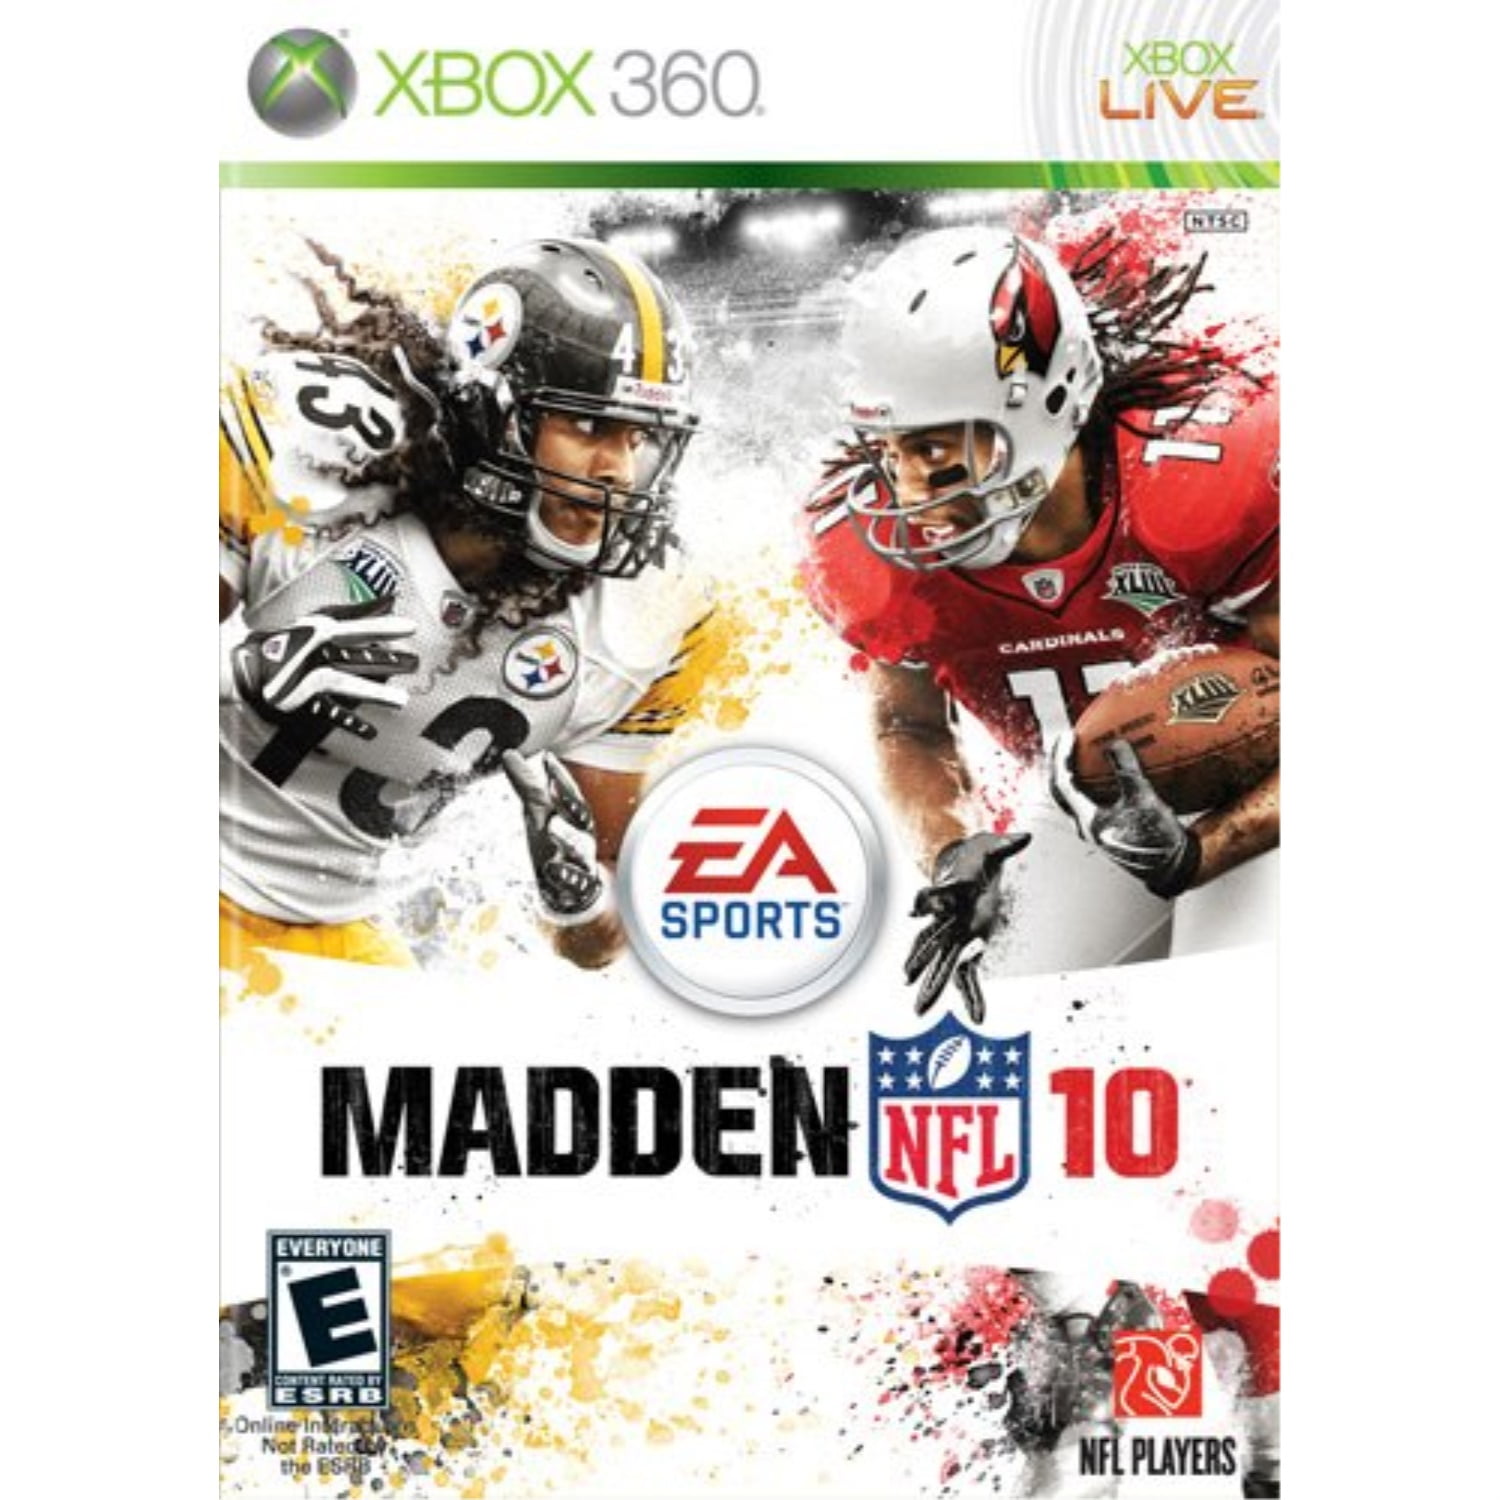 Madden NFL 10 (Xbox 360) - Pre-Owned